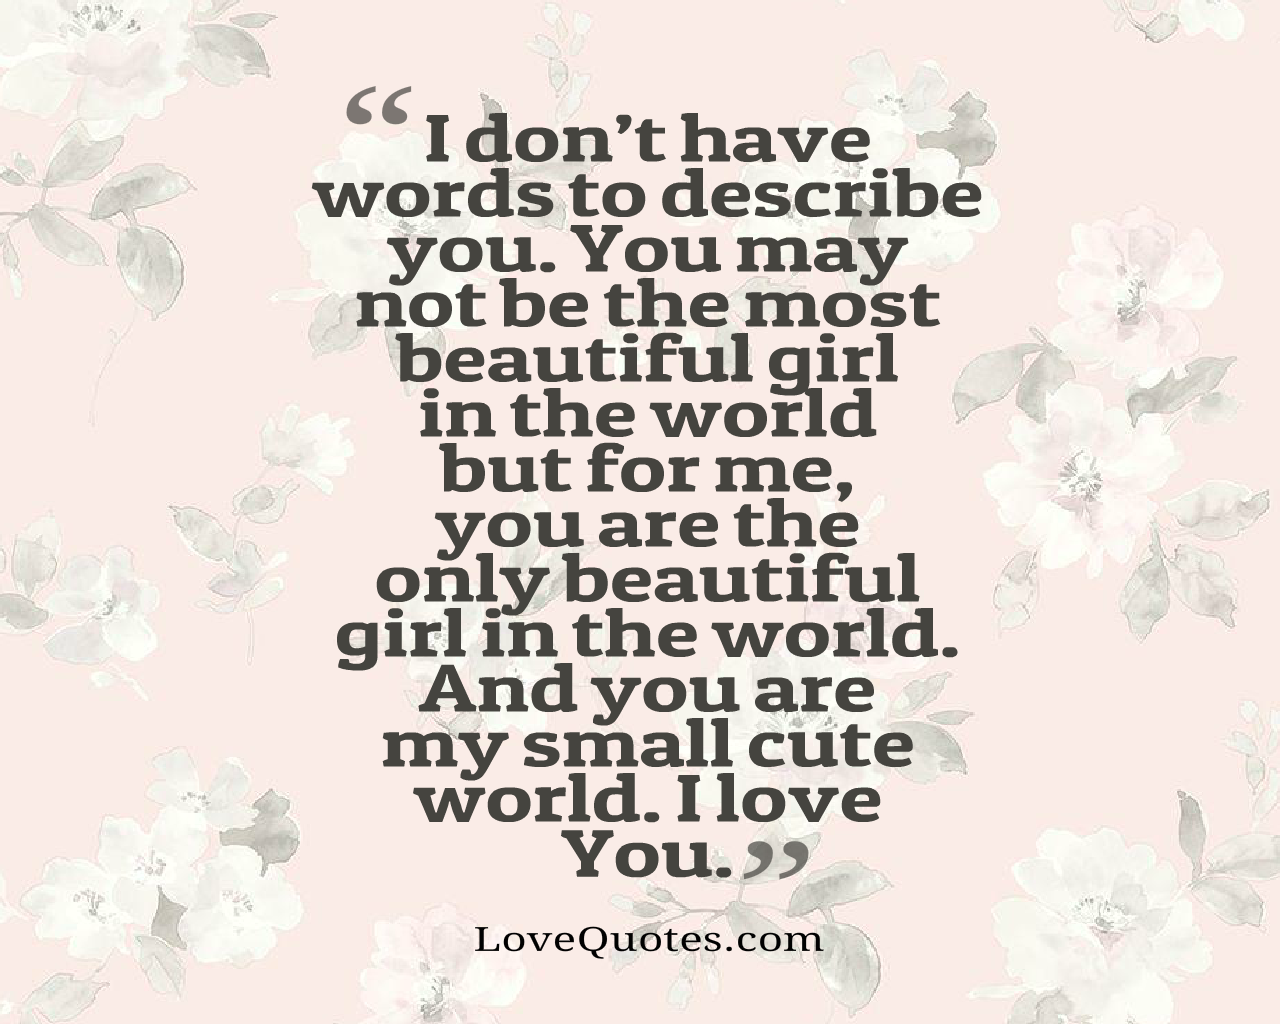 You may not be the most beautiful girl in the world but for me, you are the...